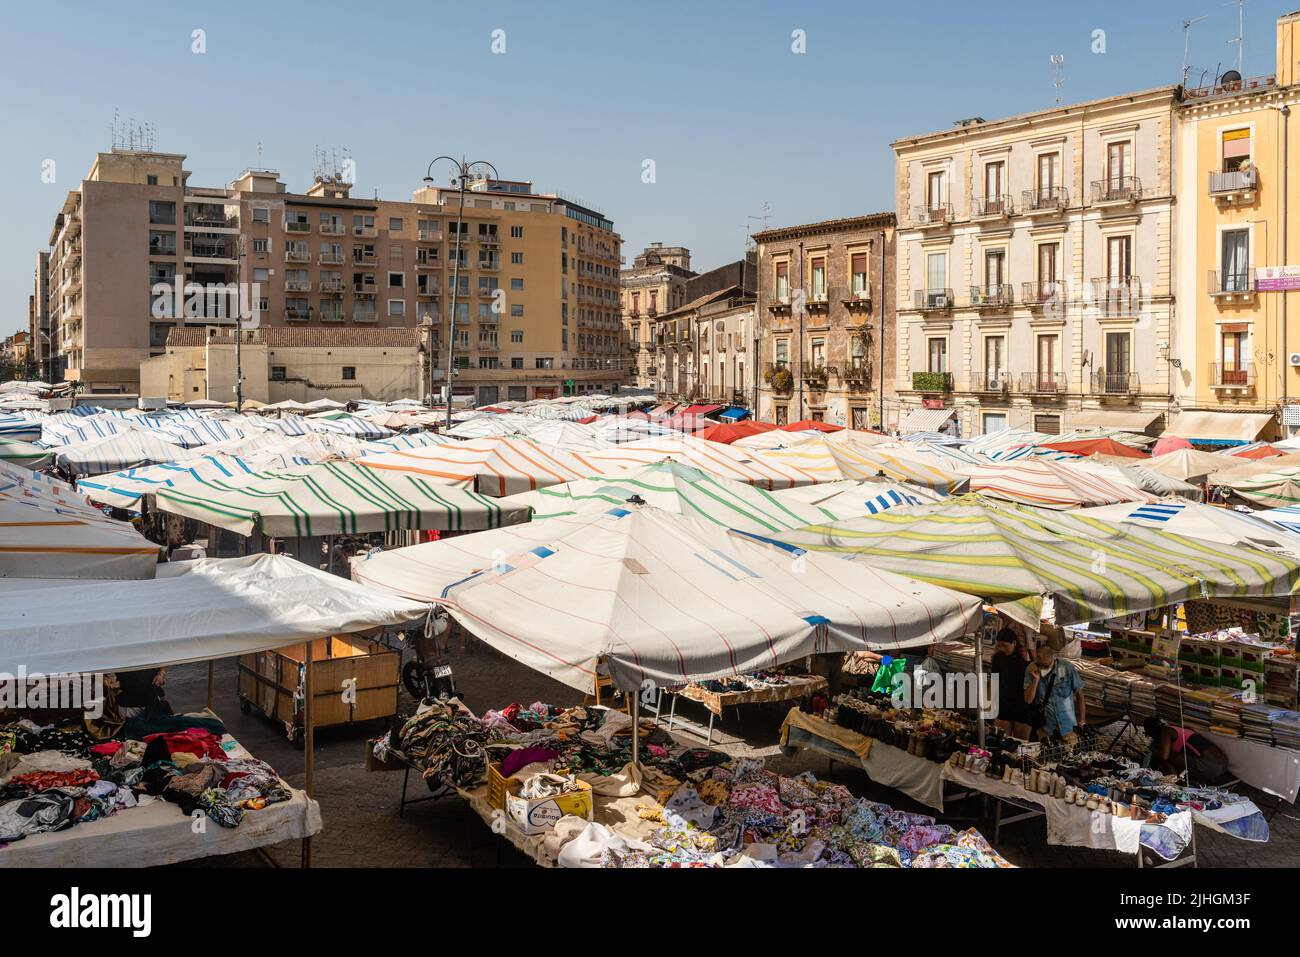 The daily Fera 'o Luni street market in Piazza Carlo Alberto, central Catania, Sicily. It is one of the oldest outdoor markets in the city Stock Photo